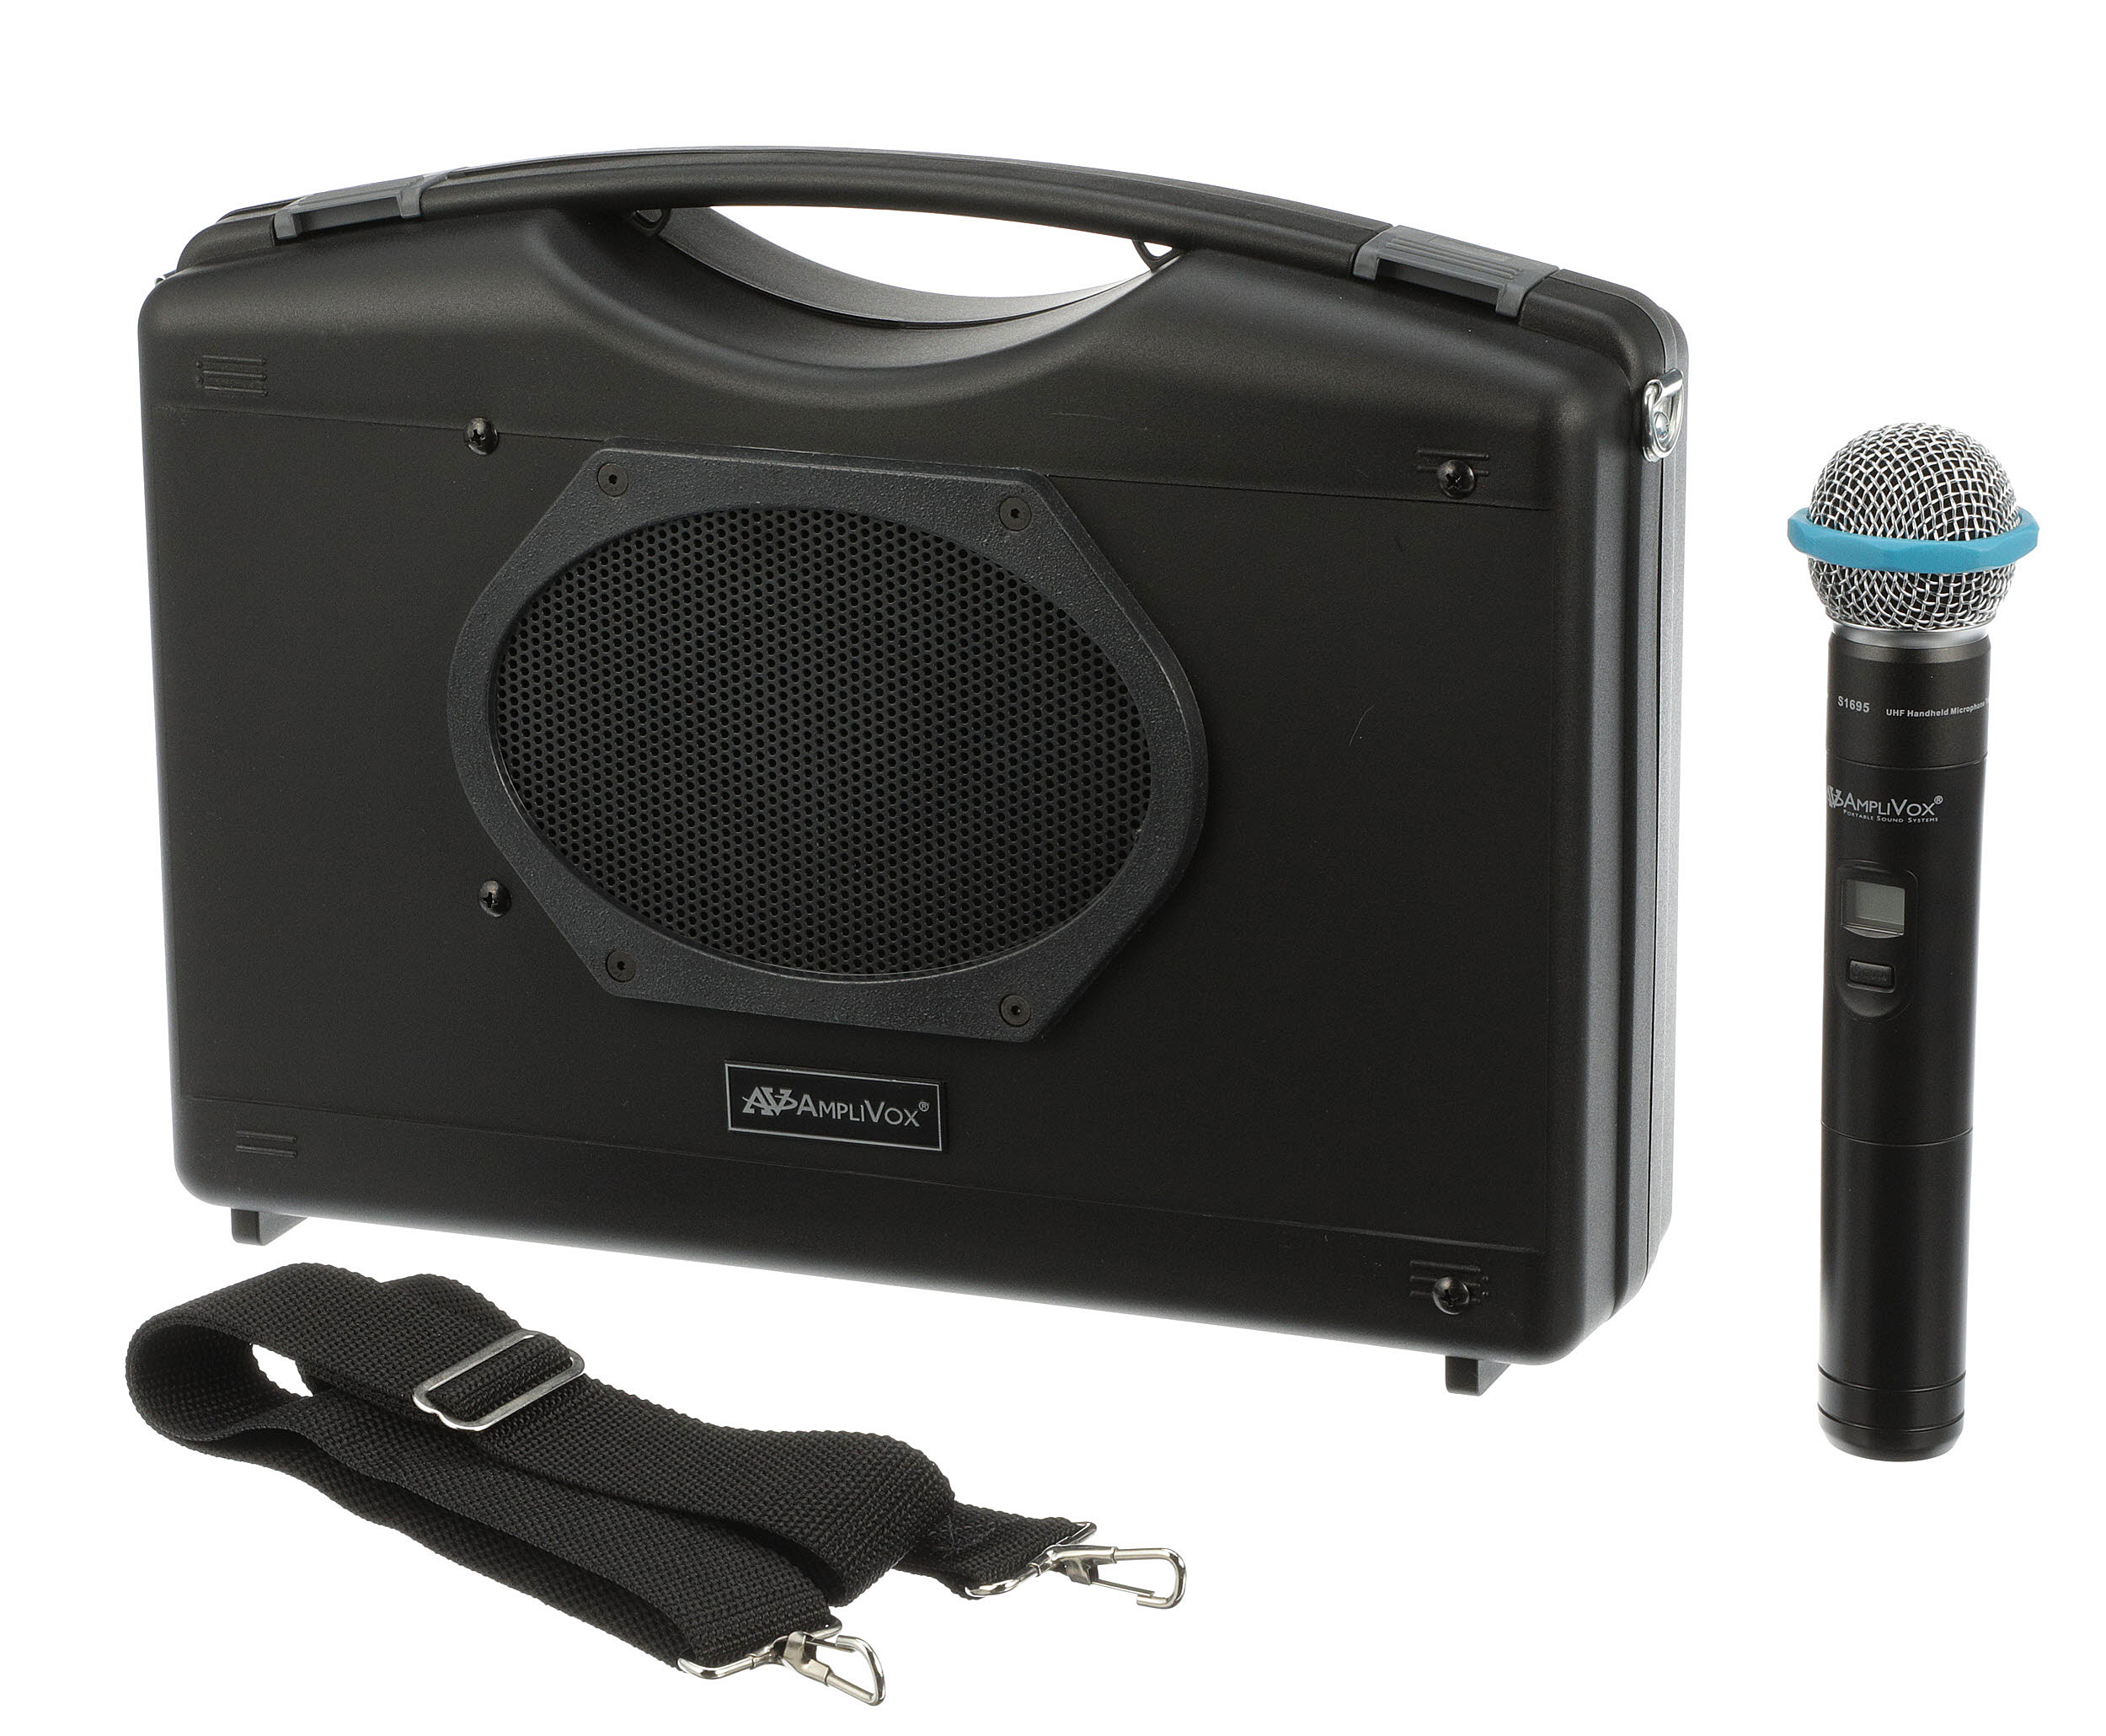 The Audio Portable Buddy (222A, 223A, 224A) is a complete presentation system built into a sleek compact carrying case that lets you reach up to 1,000 people.